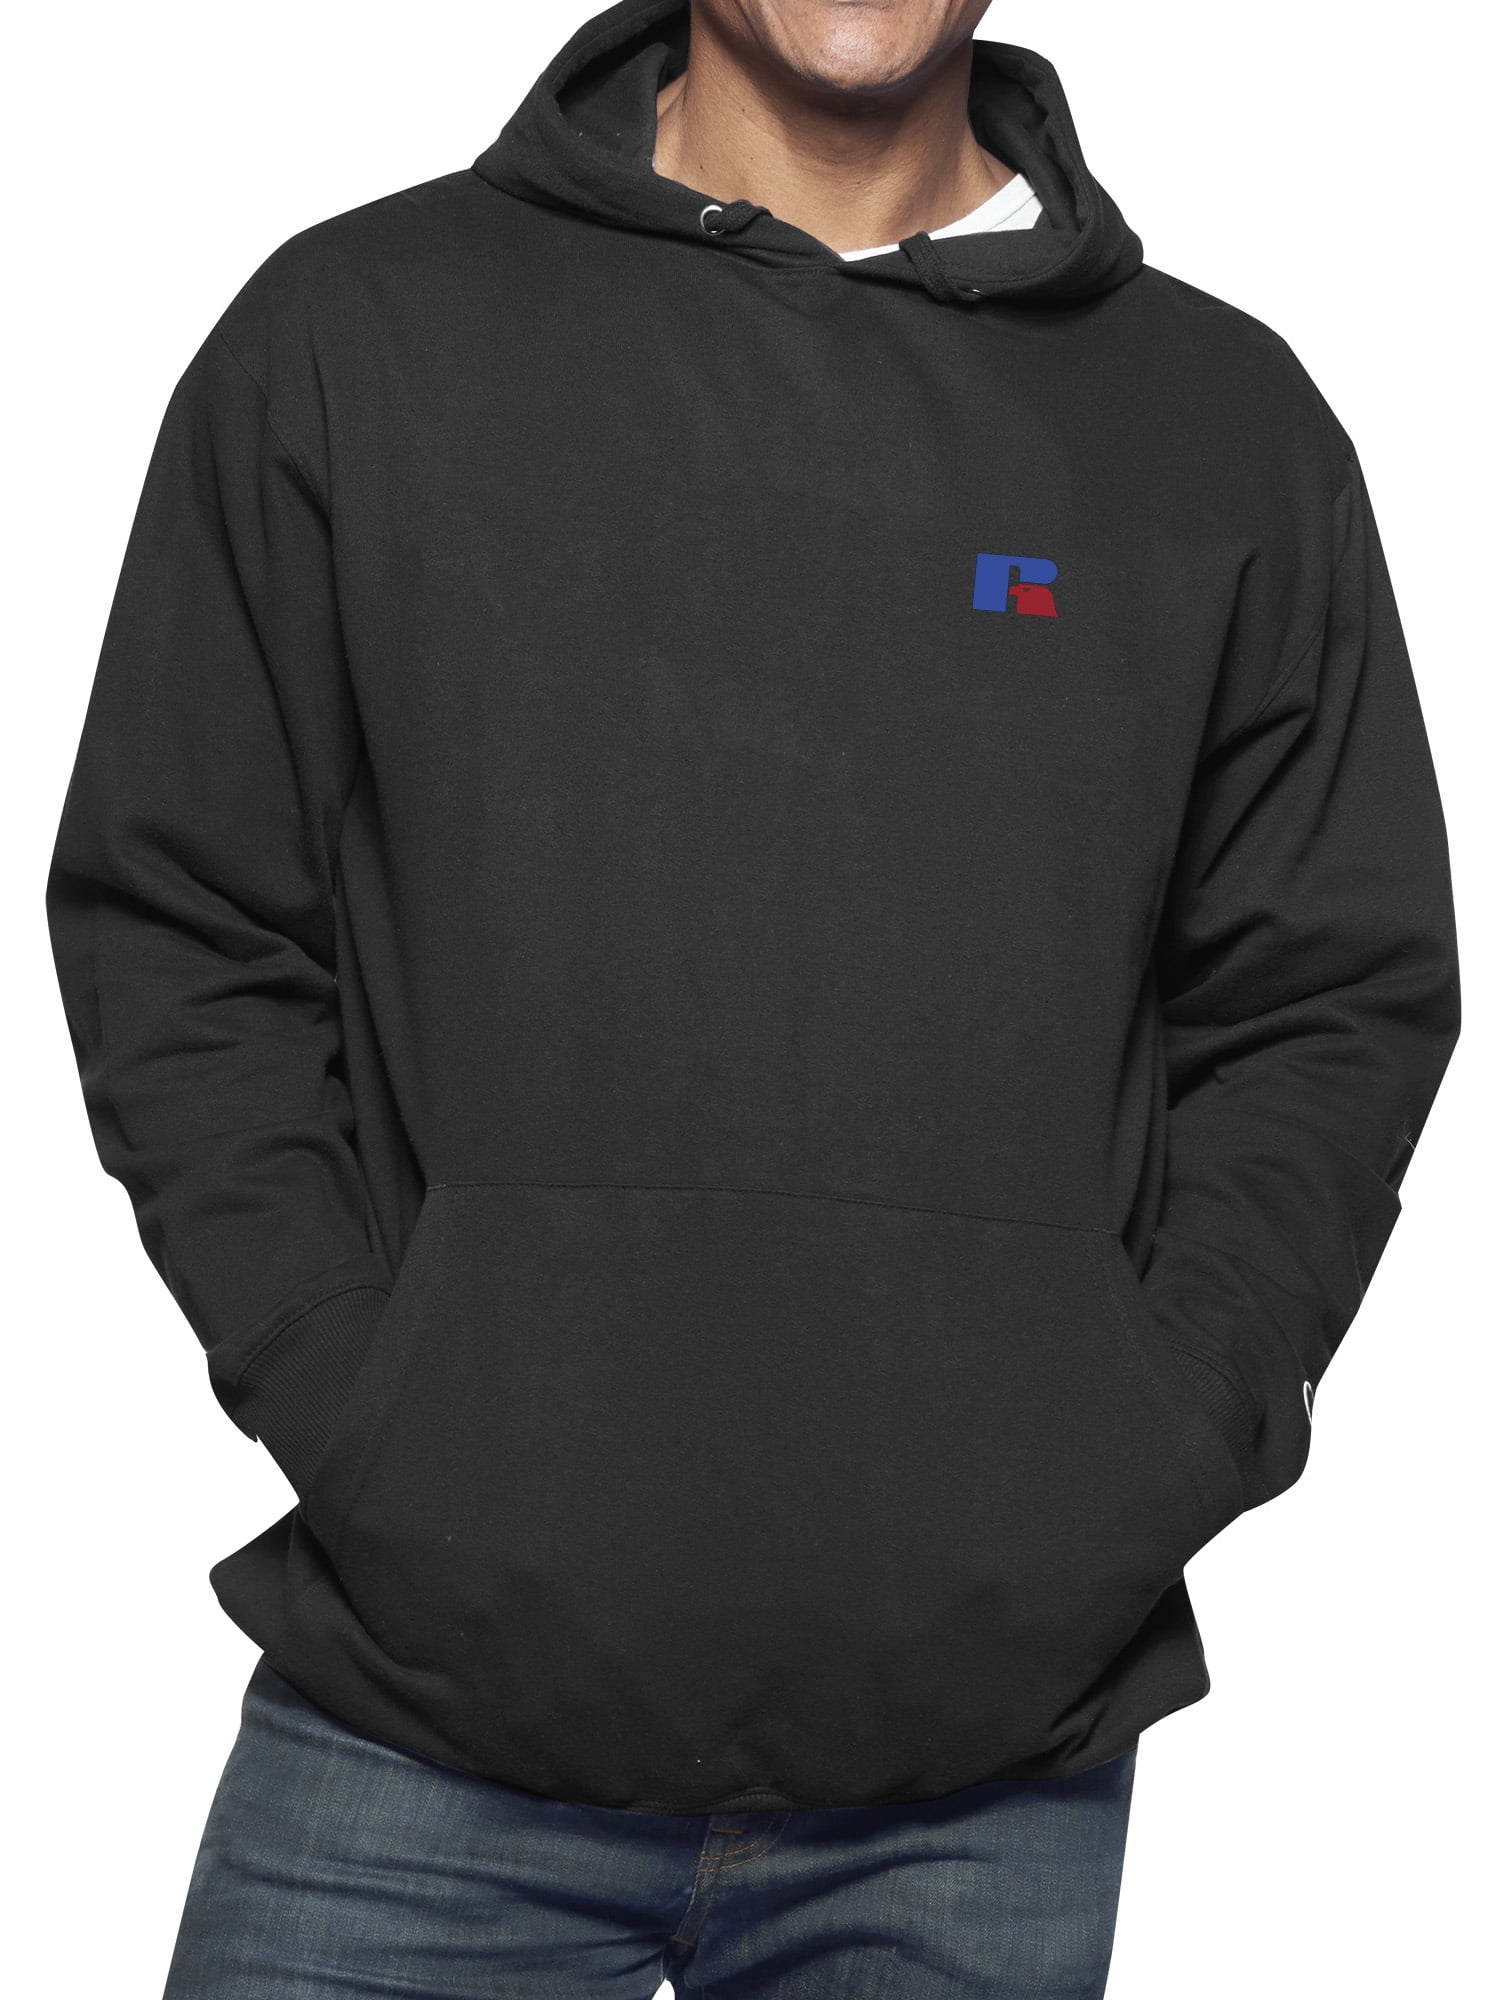 Russell Athletic Mens Big & Tall Fleece Pull-Over Hoodie 